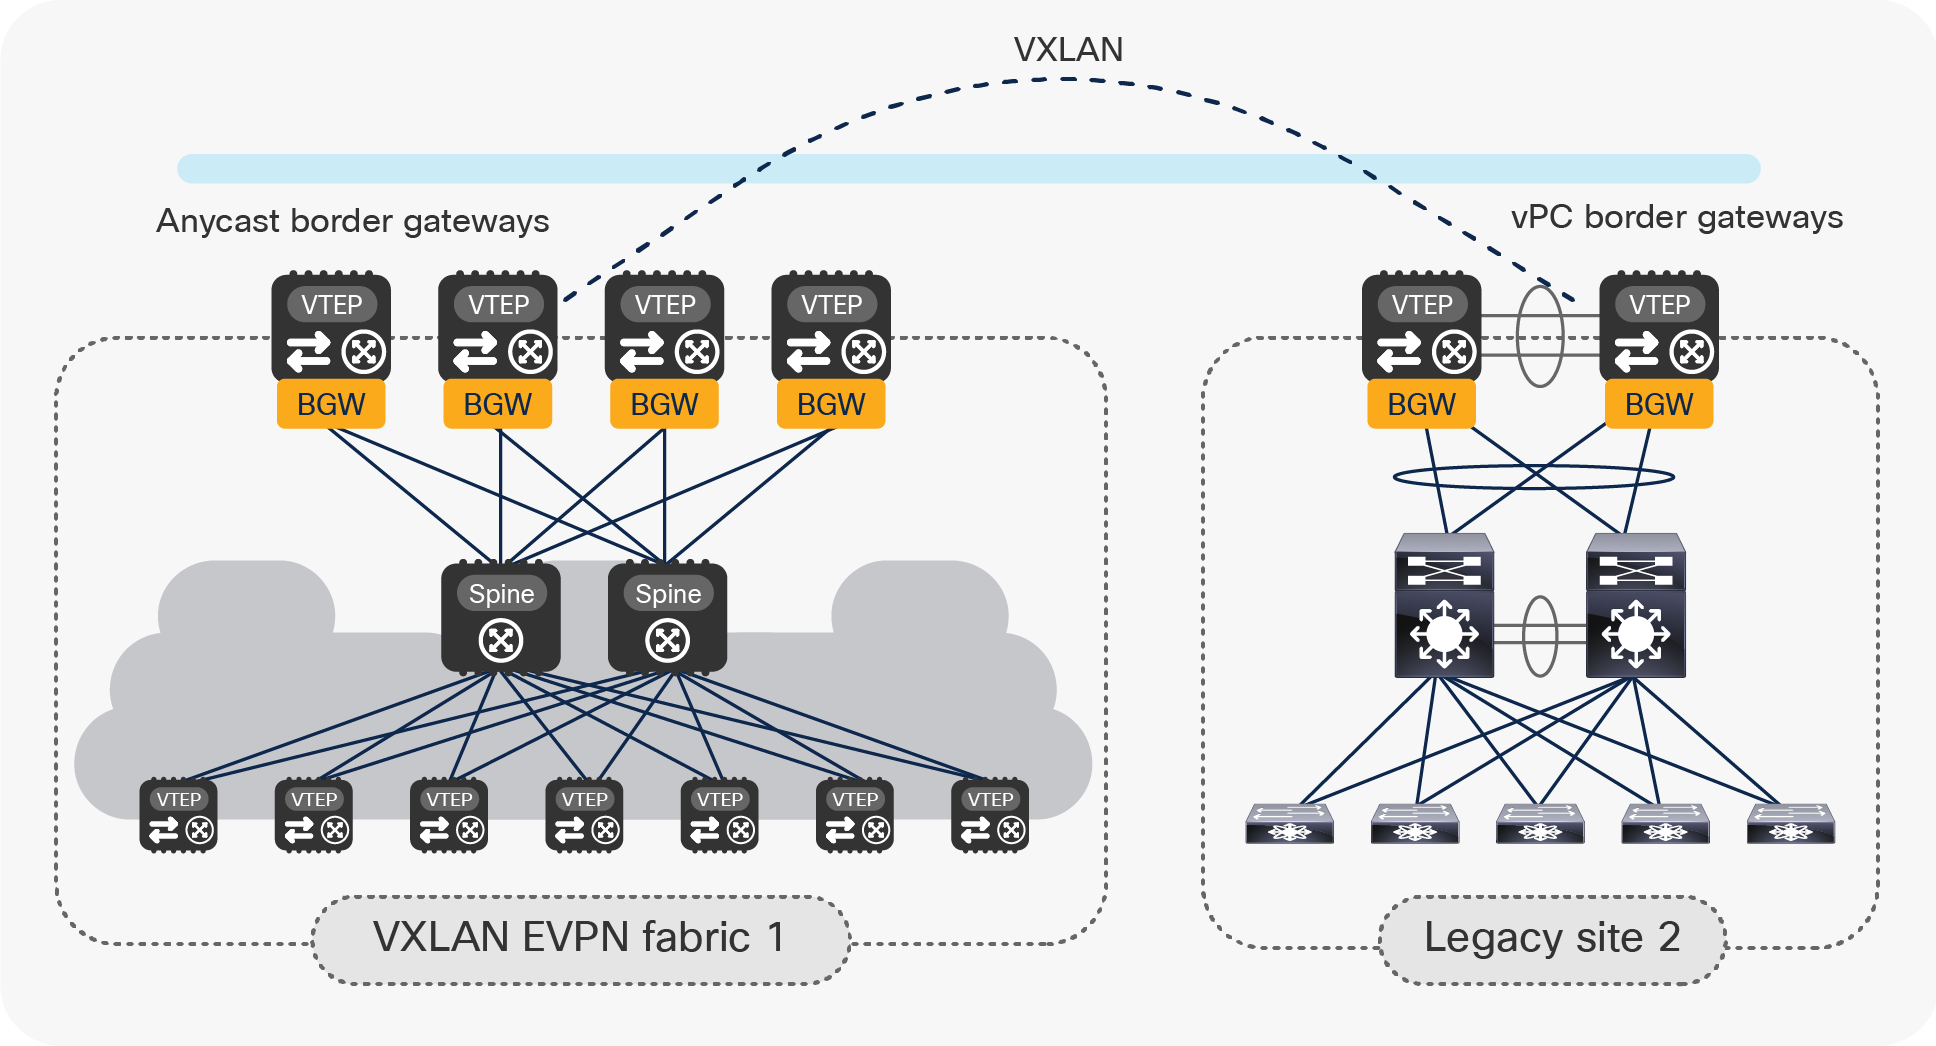 Integration/coexistence of a legacy site with a VXLAN BGP EVPN site with EVPN Multi-Site